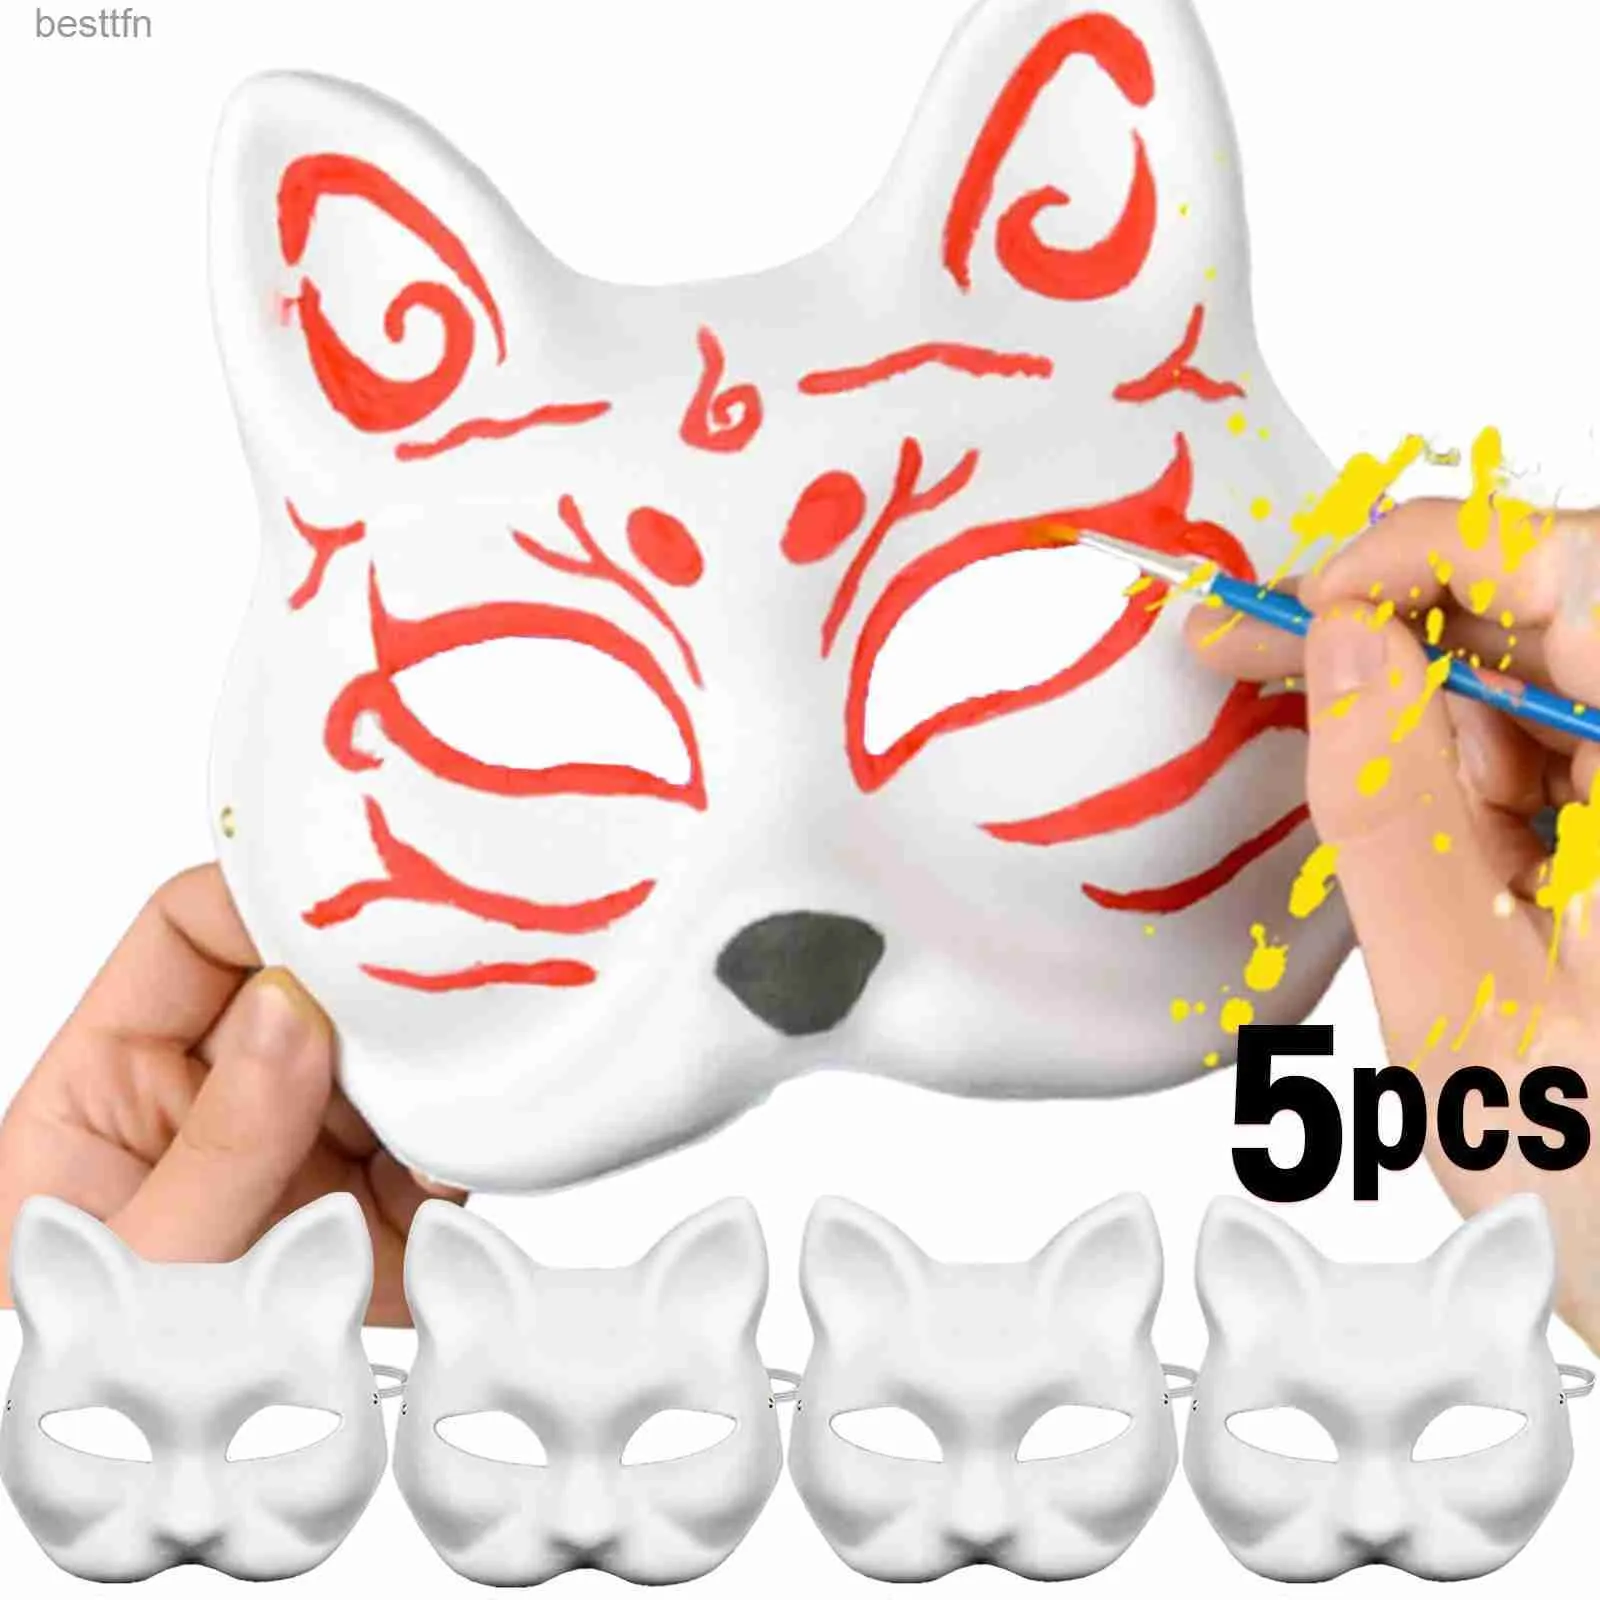 Kostymtillbehör 5st Masker Cat Mask Diy White Blank Cosplay Face Halloween Party Paper Omained Paintable Animal Mache Comel231011